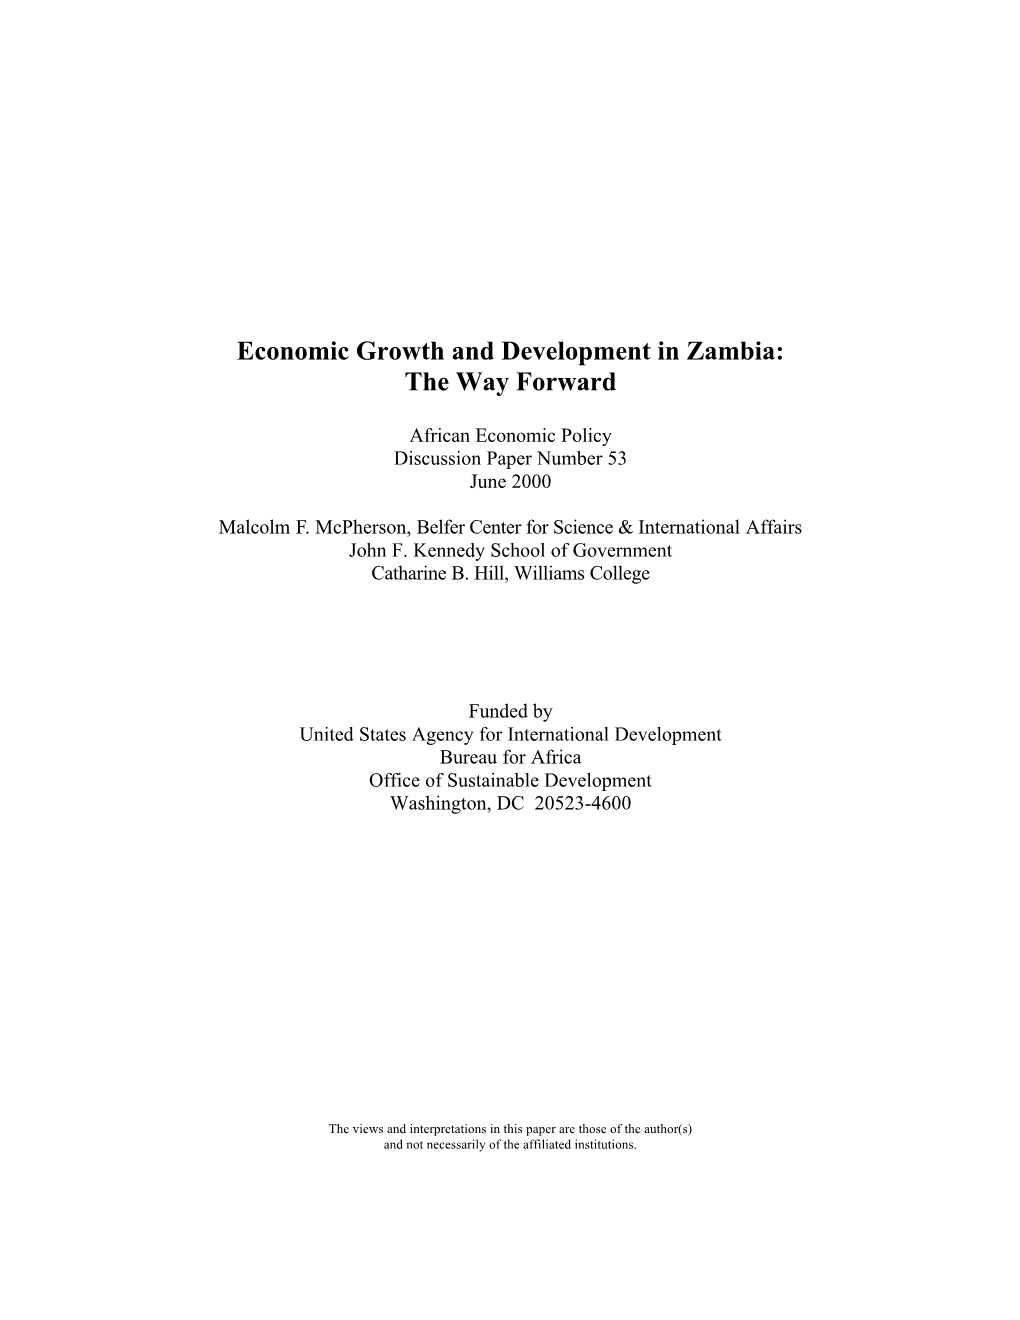 Economic Growth and Development in Zambia: the Way Forward